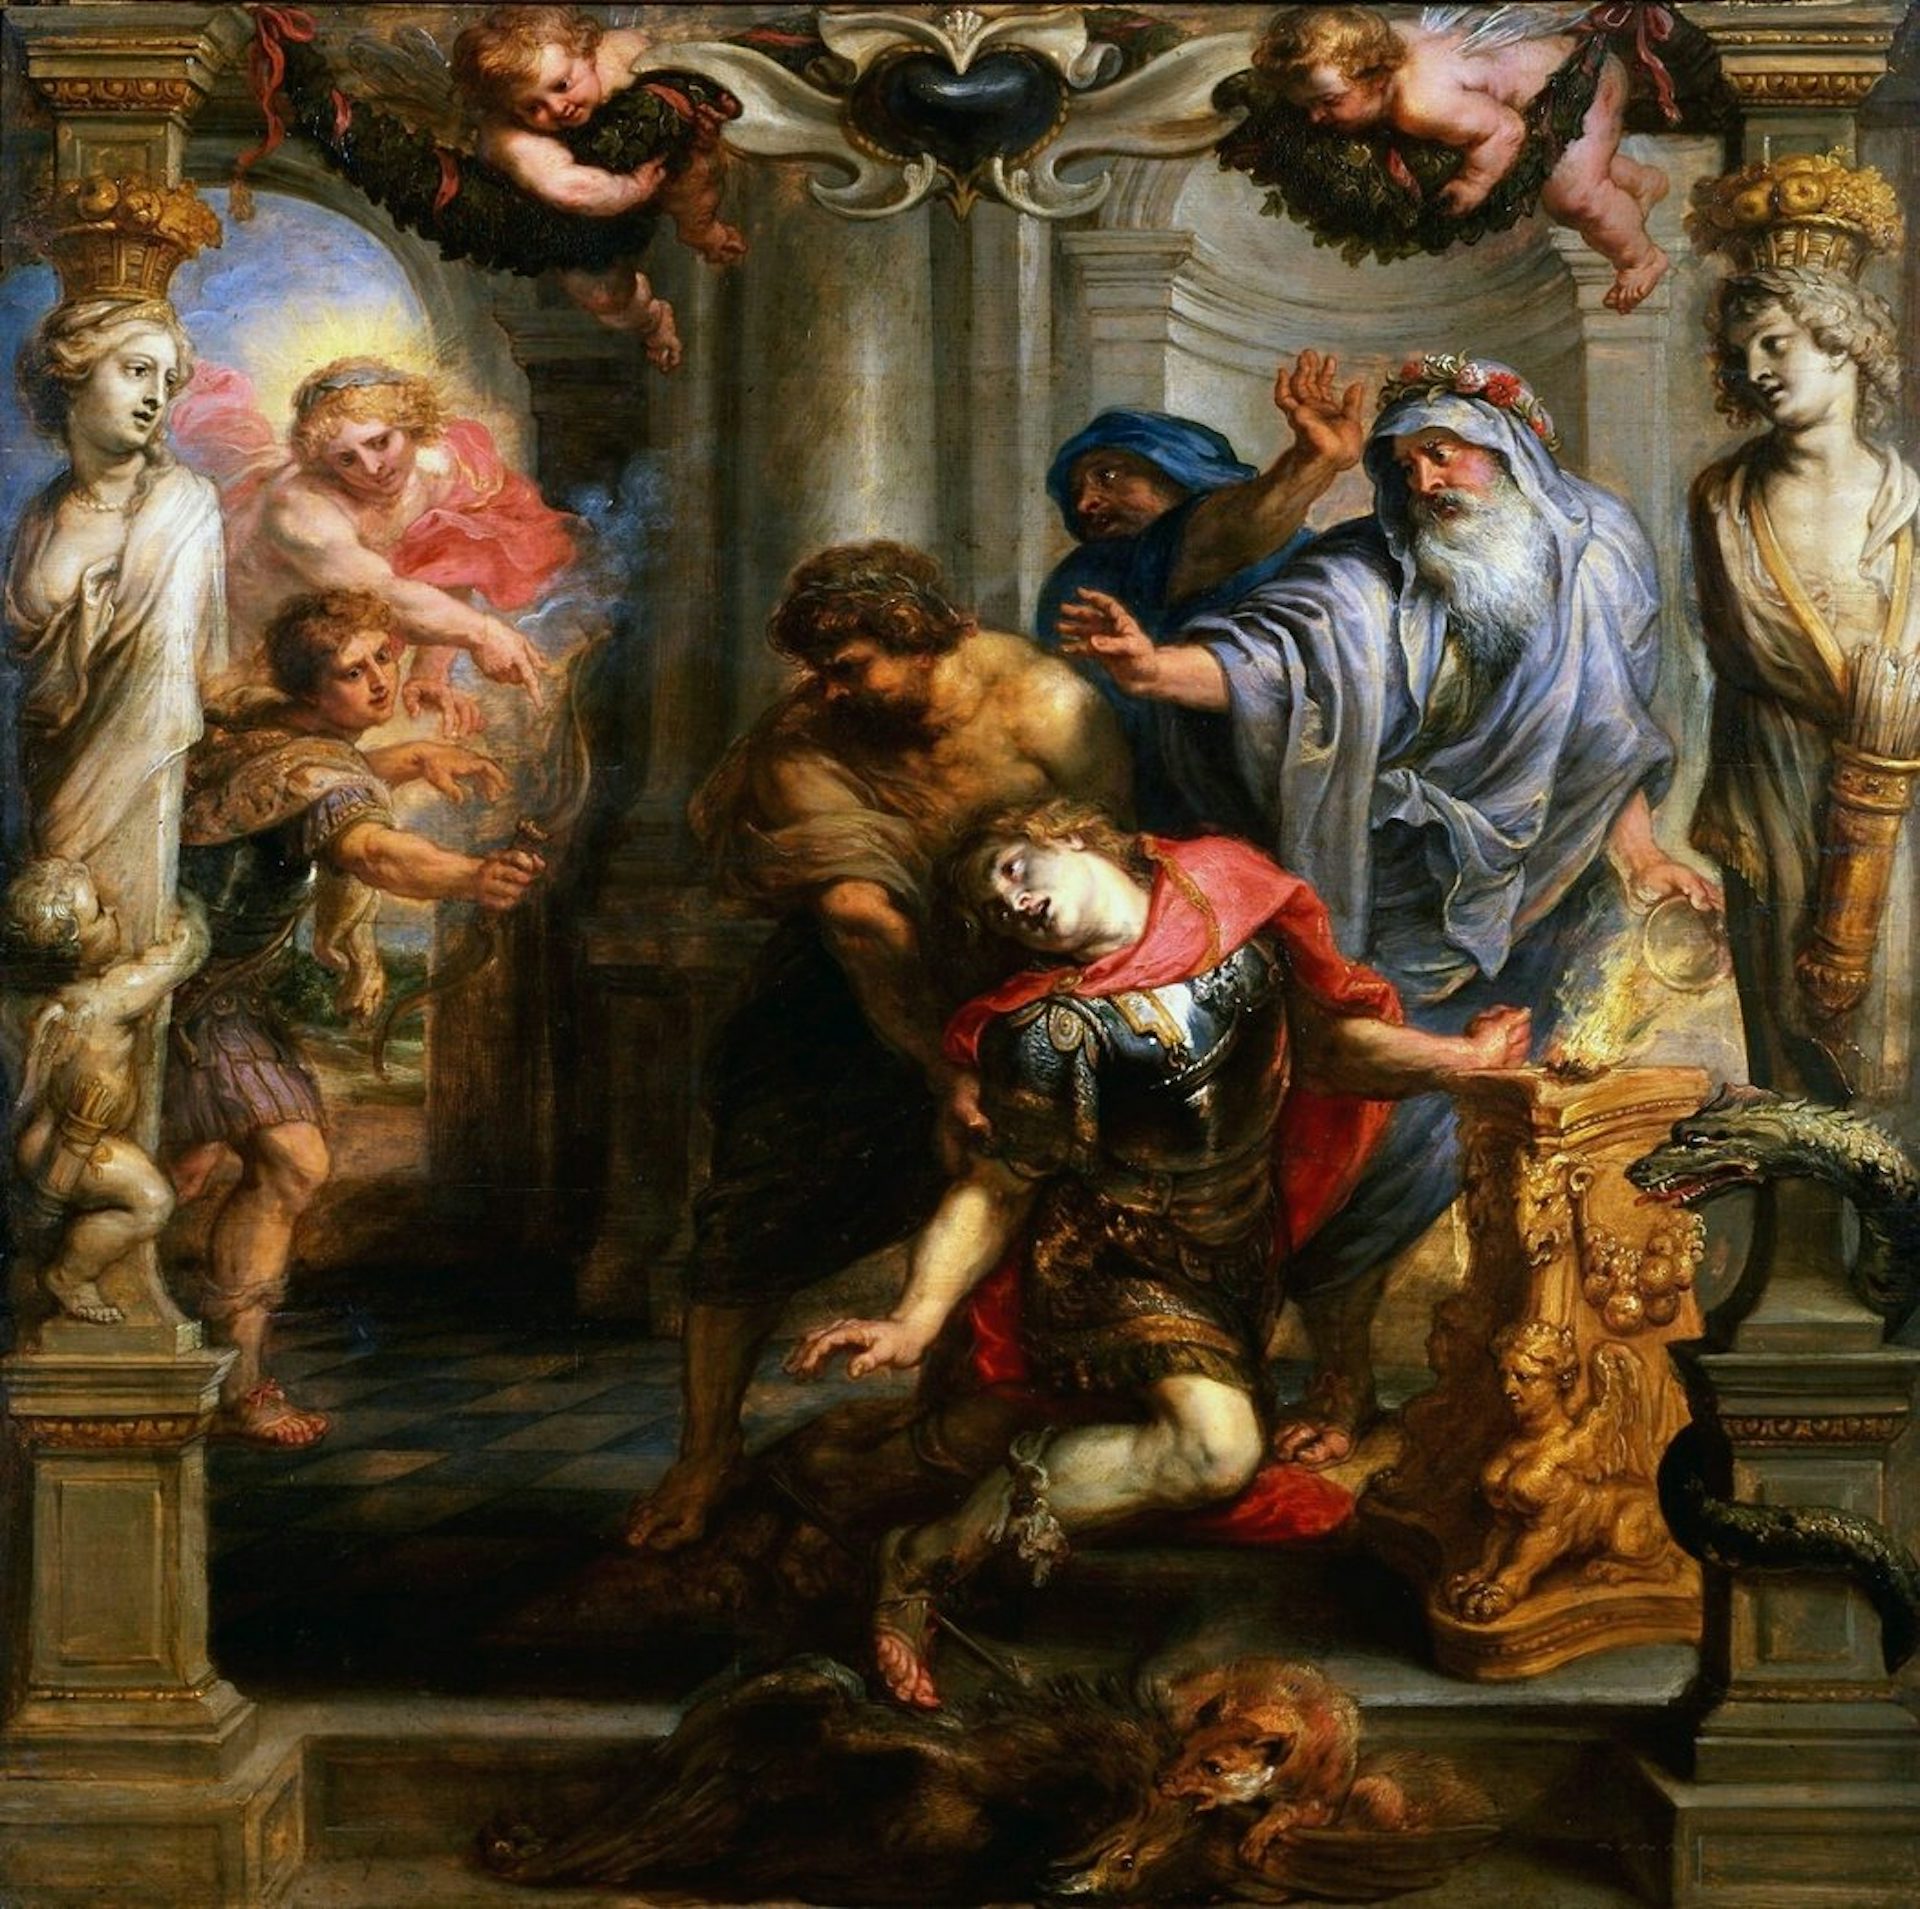 The Death of Achilles by Peter Paul Rubens